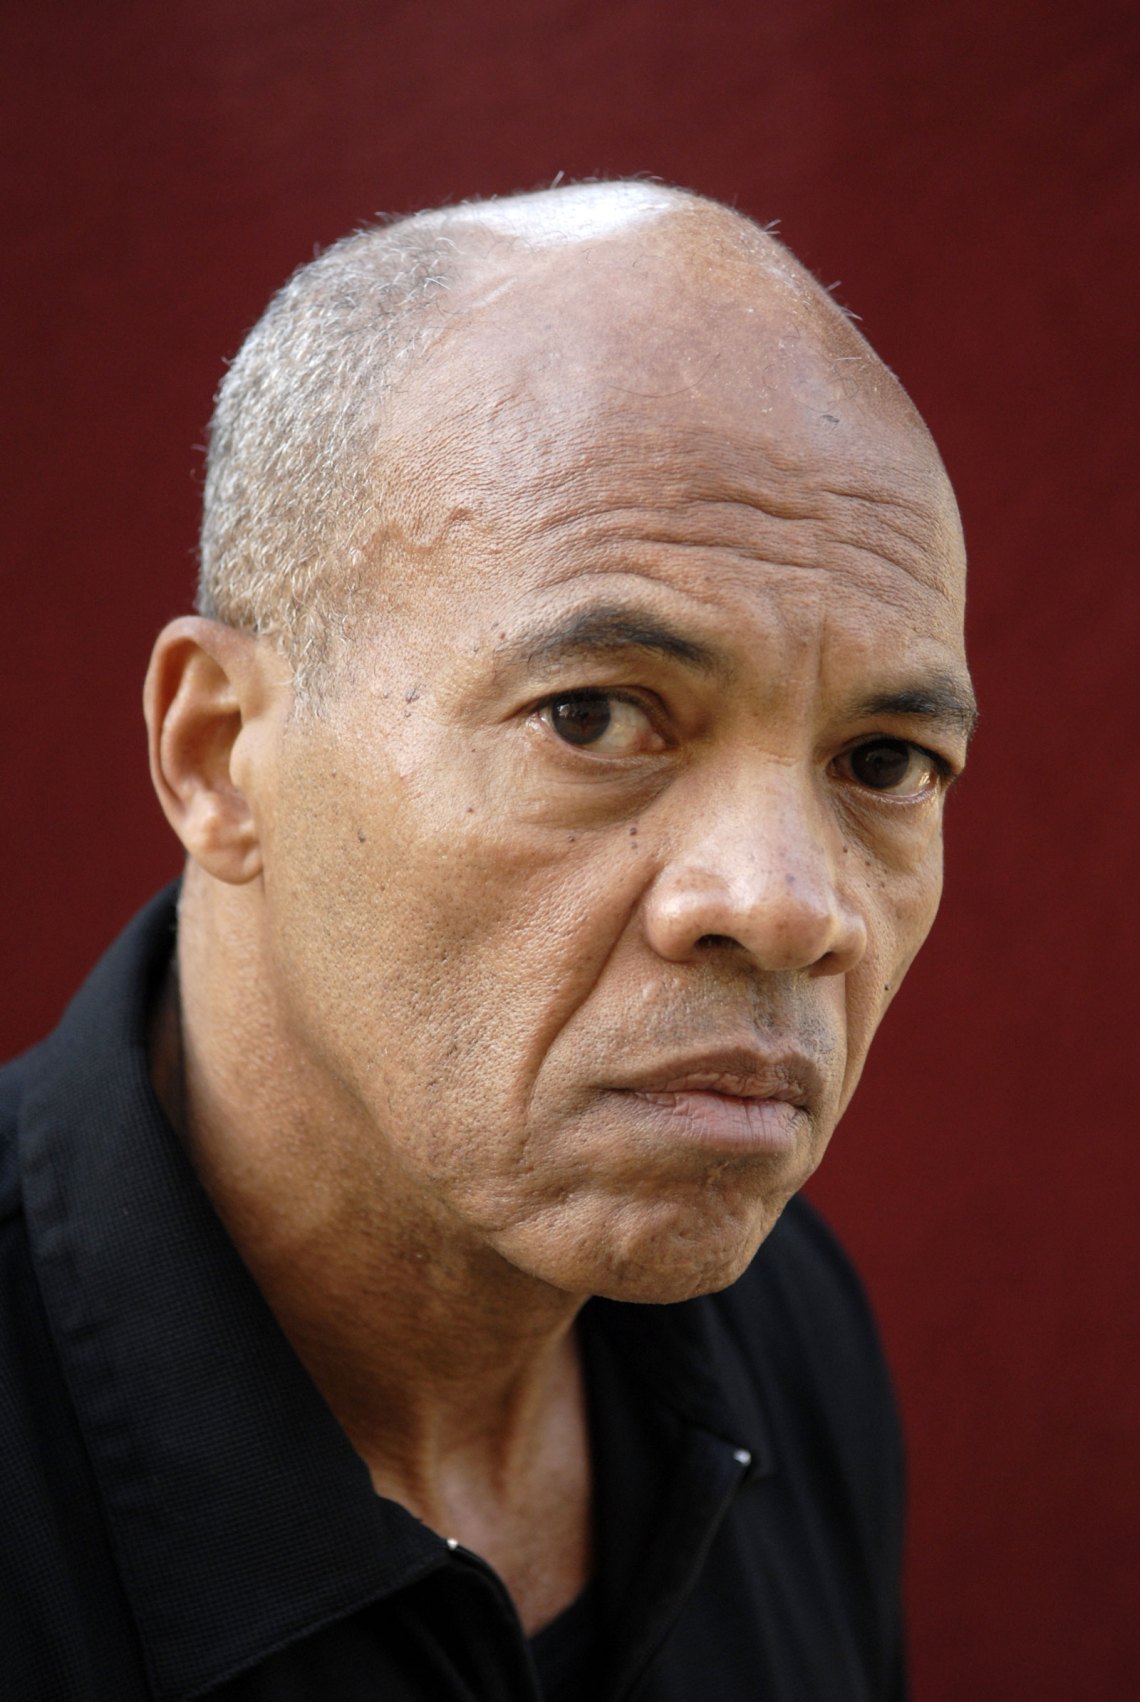 A close-up image of the writer John Edgar Wideman from the chest up in front of a red background